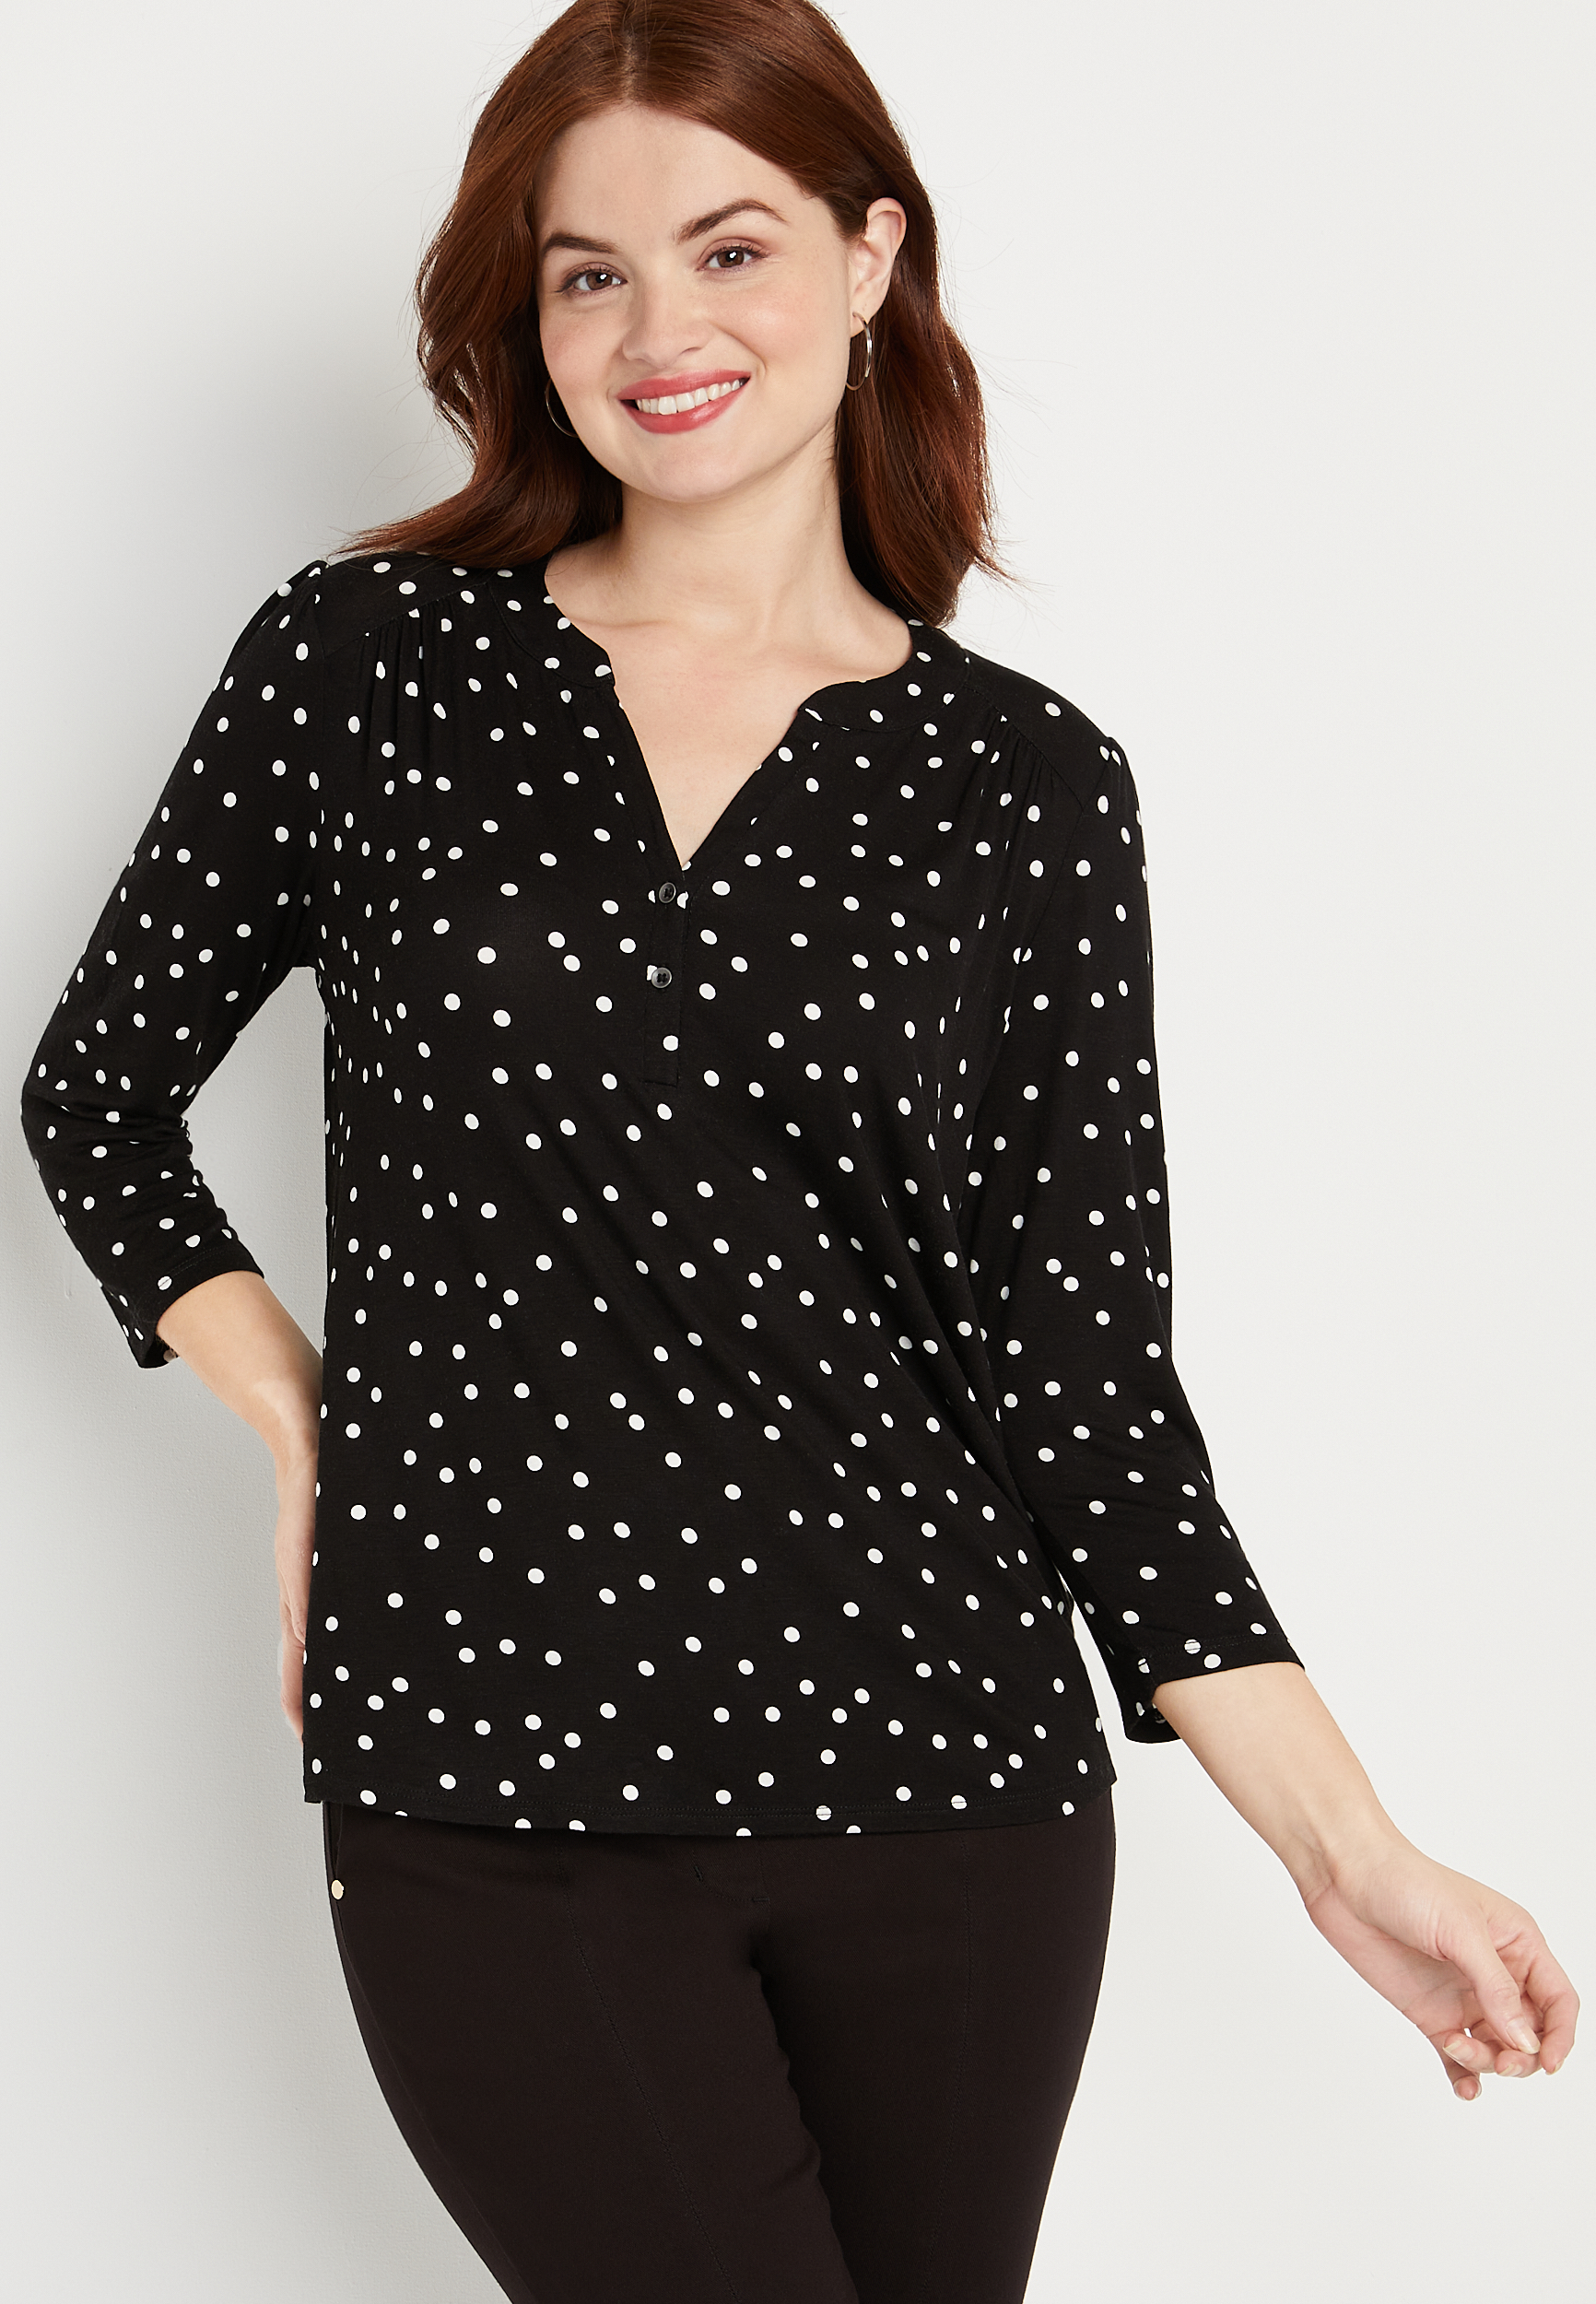 Black Polka Dot Button Front Tee | maurices